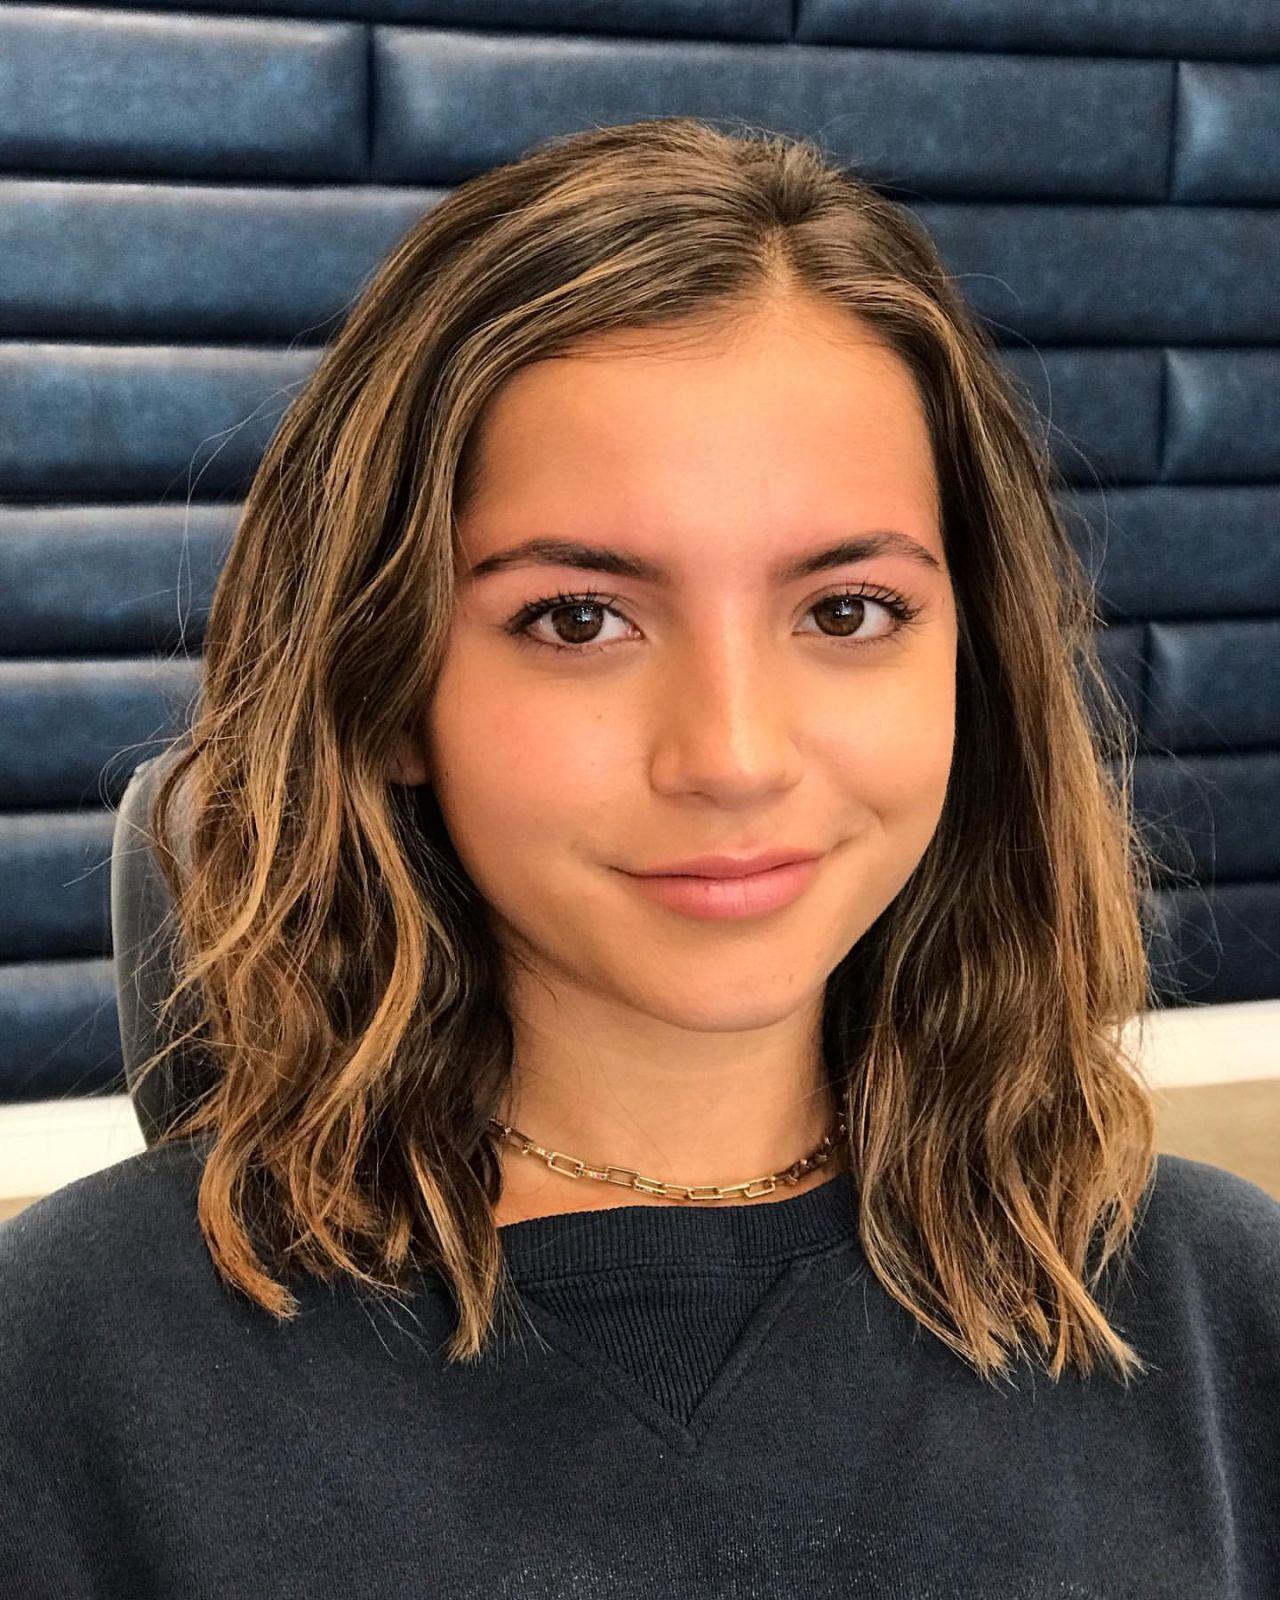 70+ Hot Pictures Of Isabela Moner Which Will Rock Your World 18